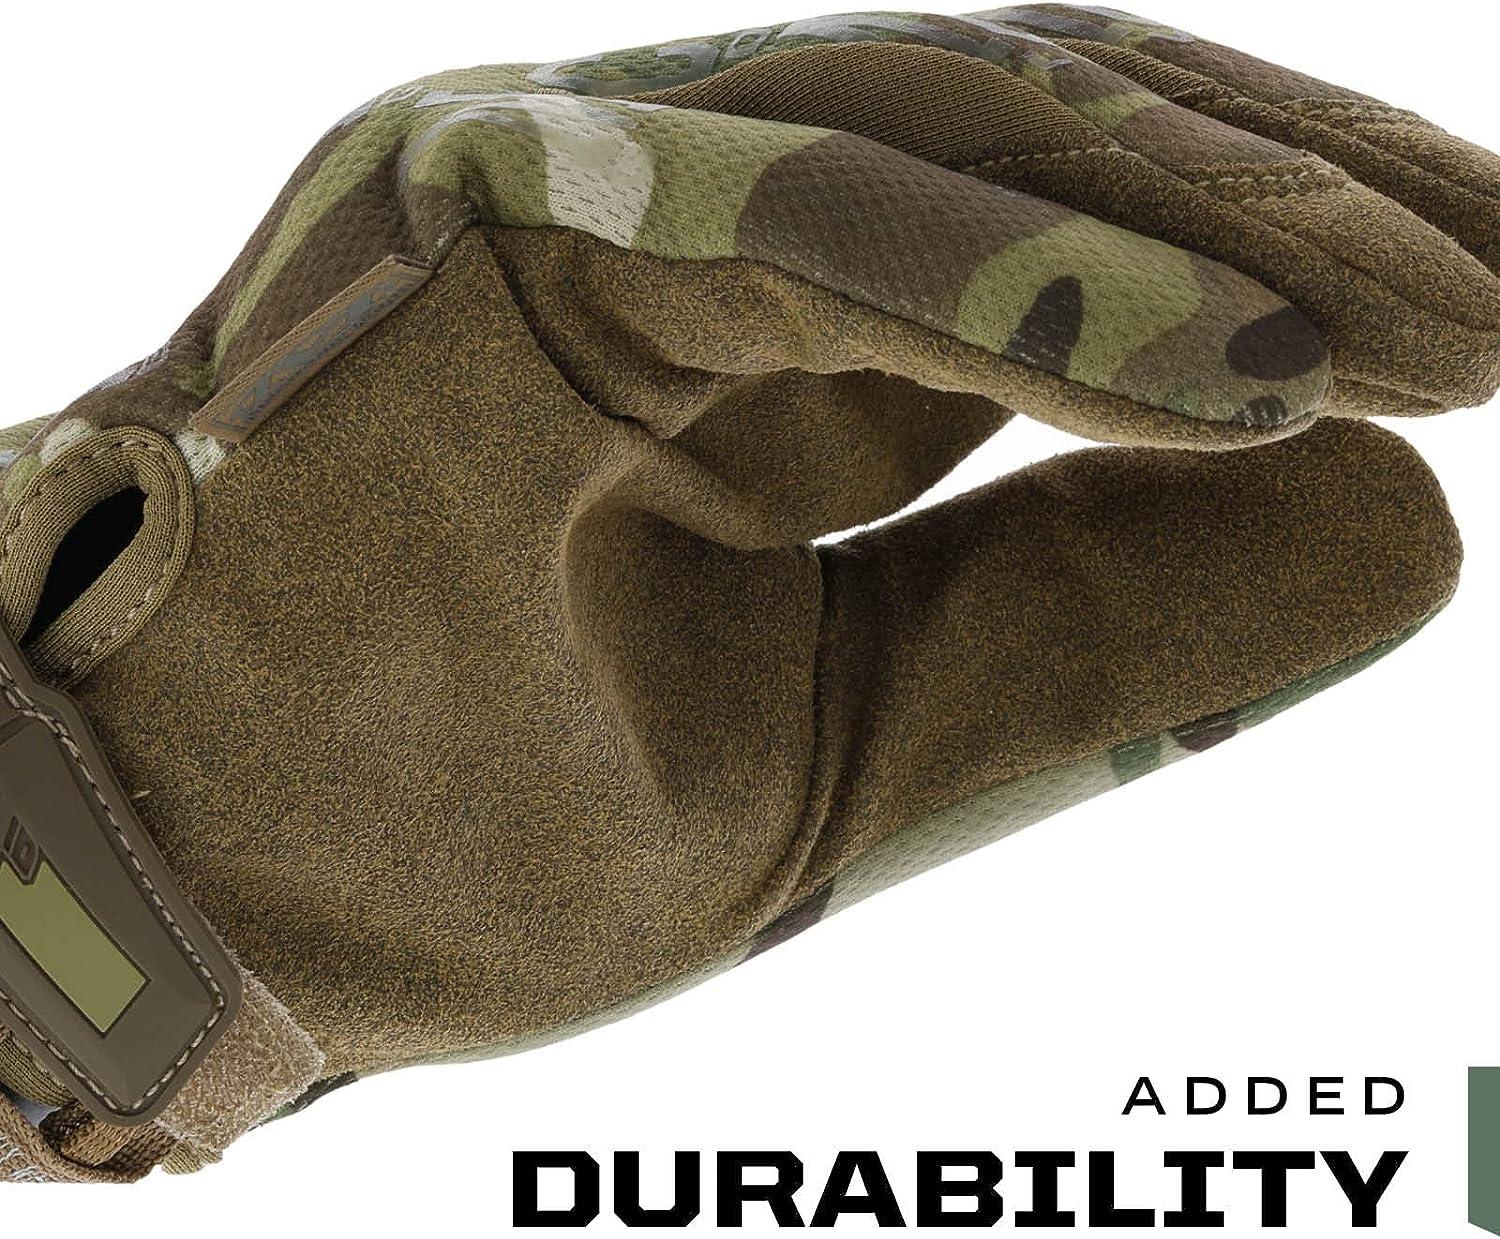 Mechanix Wear: The Original Work Glove with Secure Fit, Synthetic Leather  Performance Gloves for Multi-Purpose Use, Durable, Touchscreen Capable